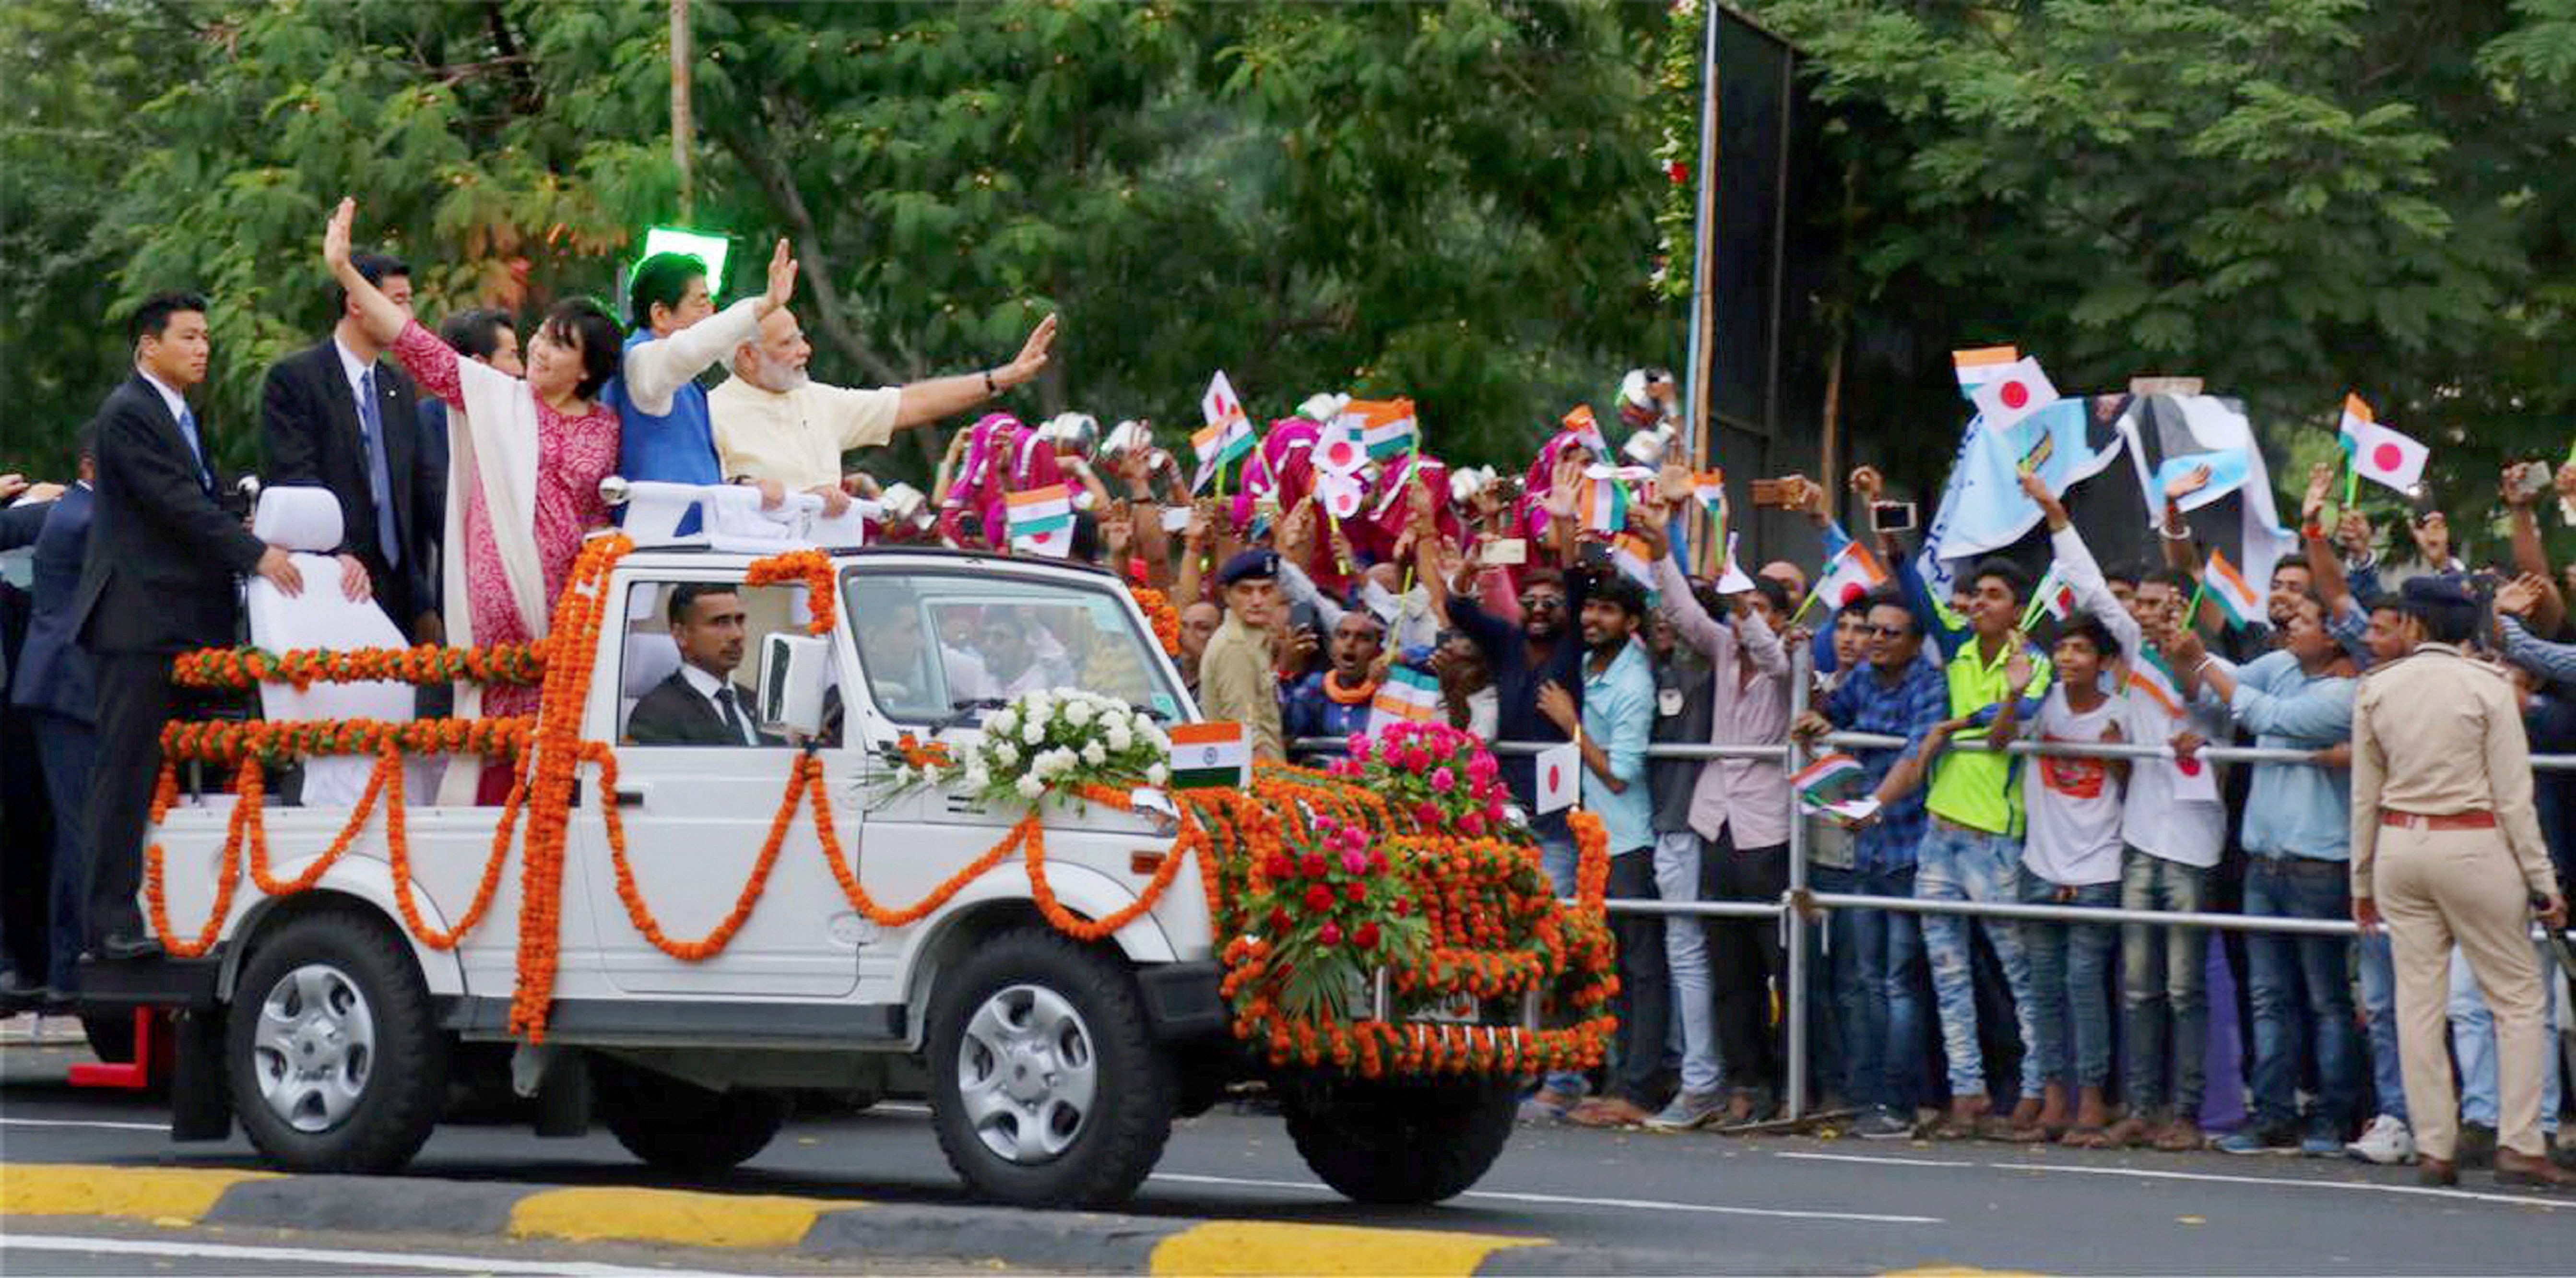 Modi, Abe hold road show in Indian city of Ahmedabad